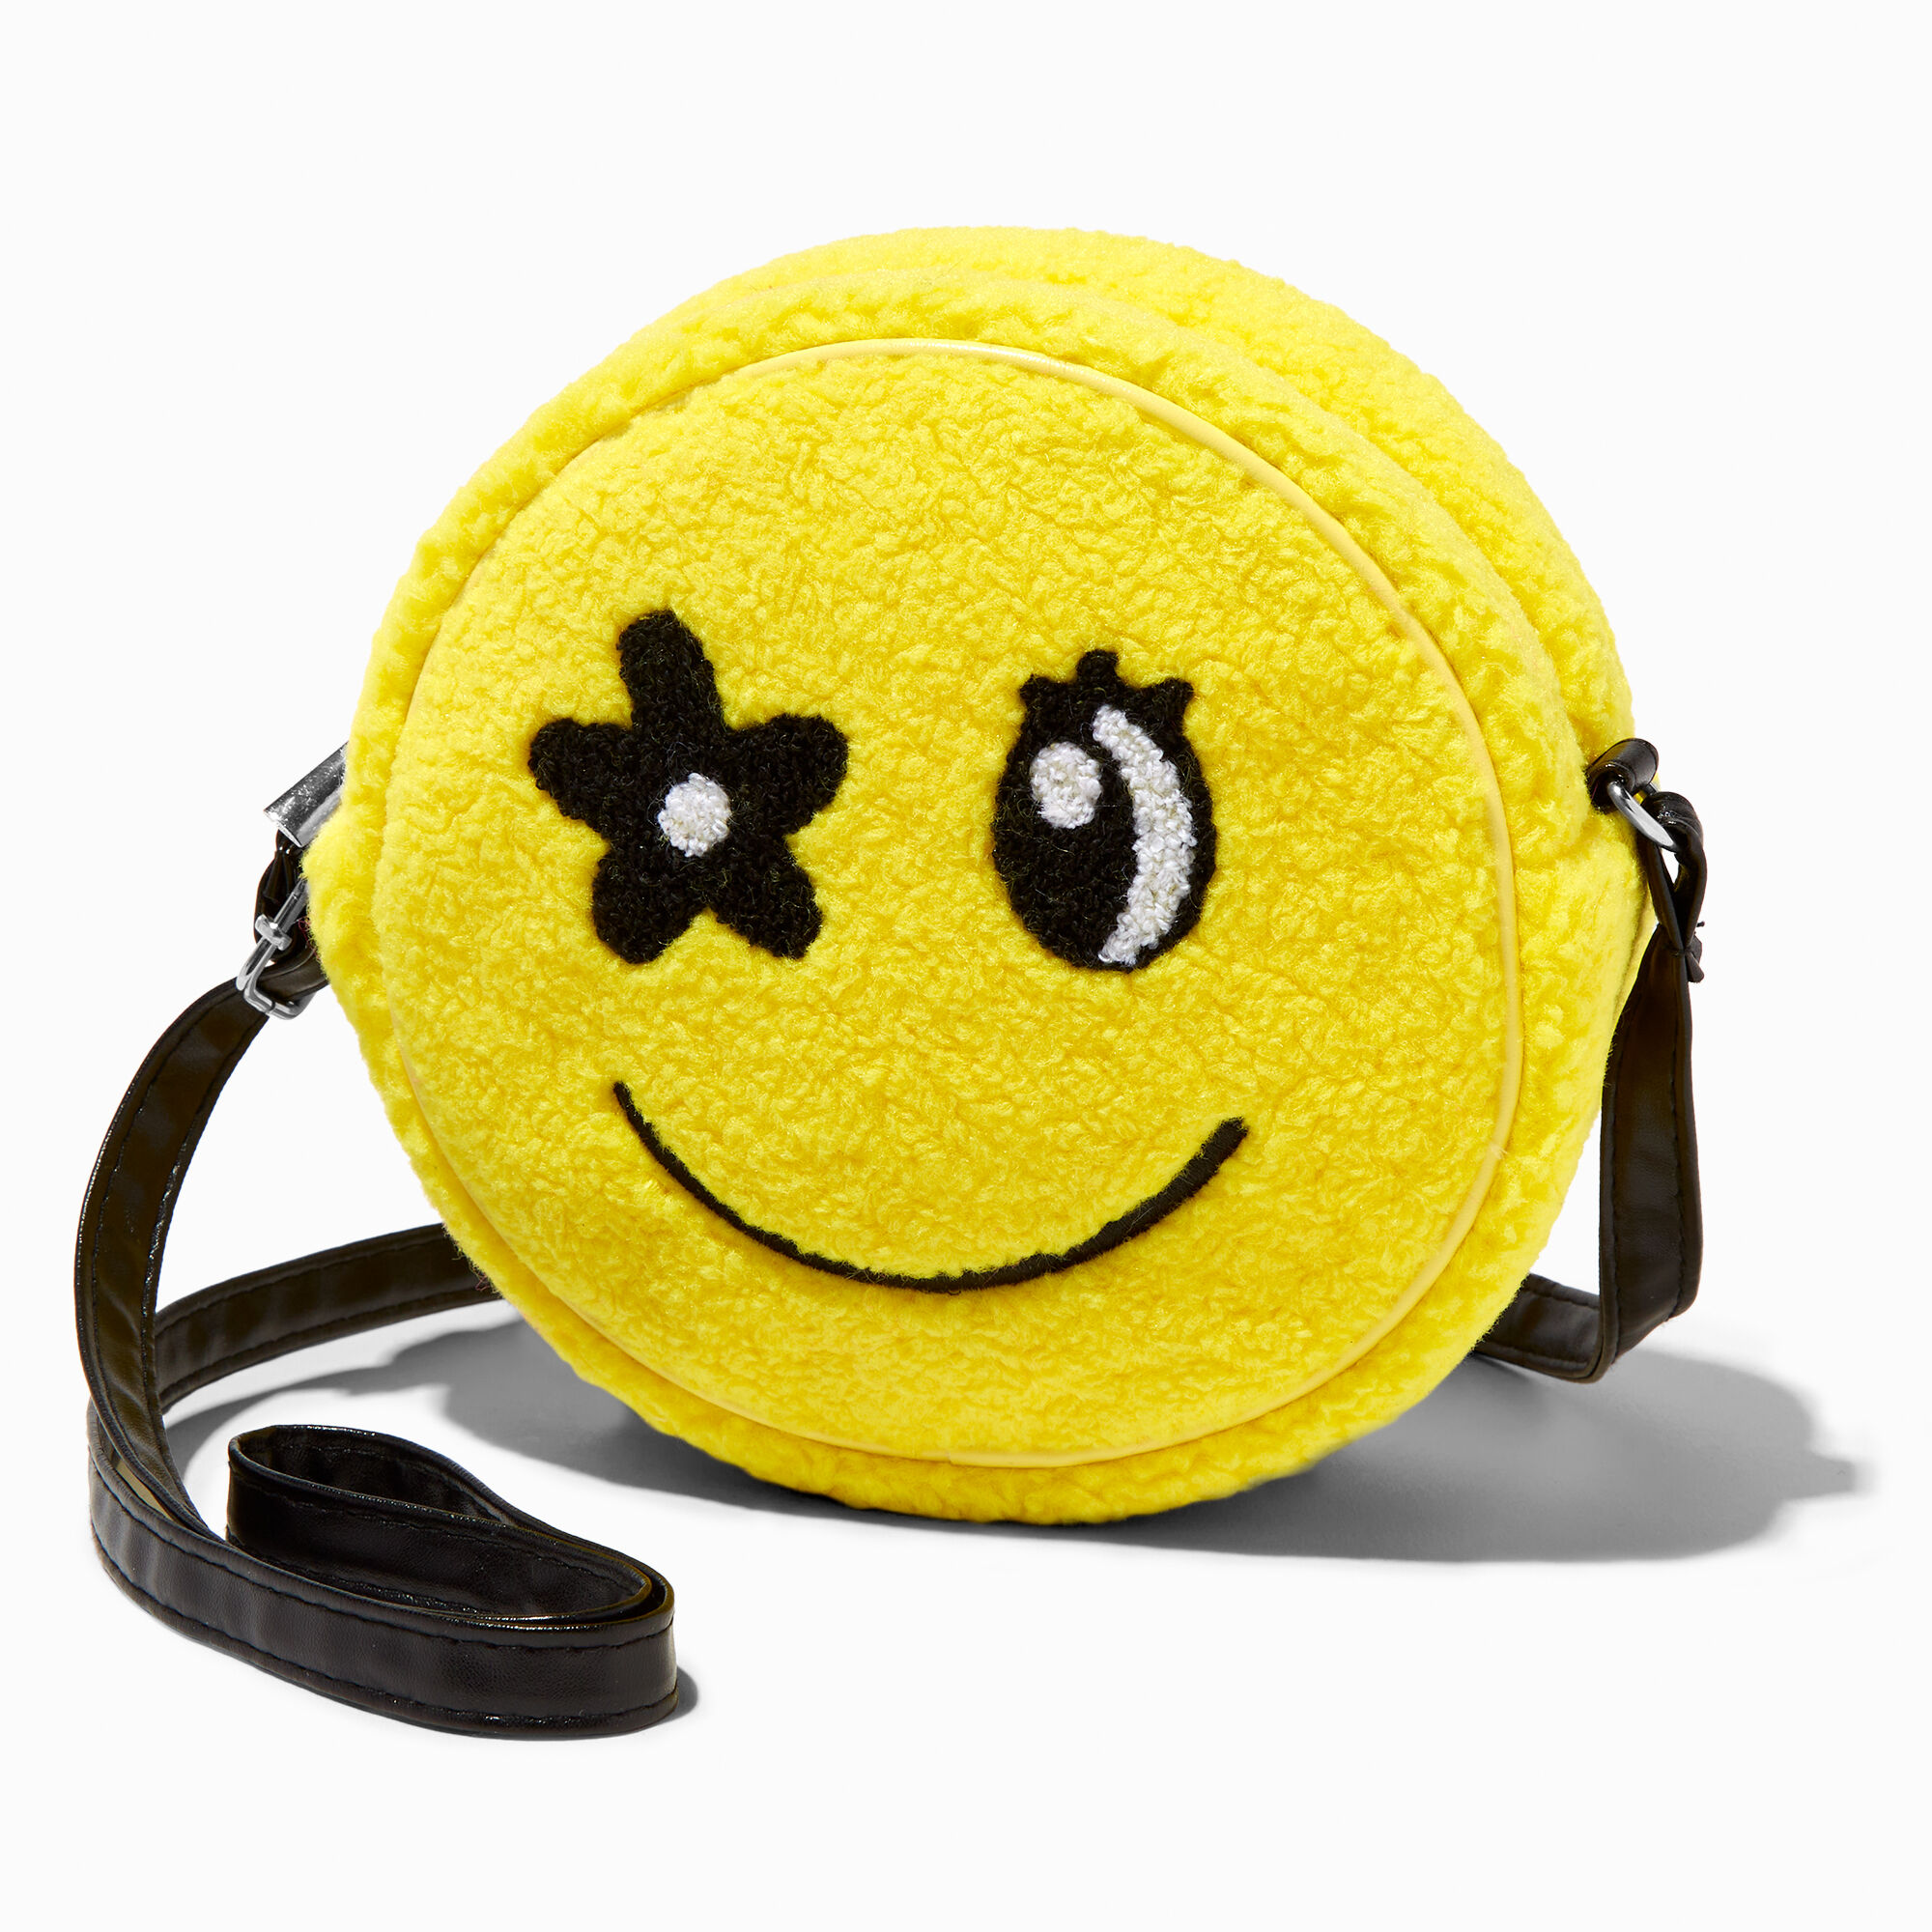 Vintage Accessory Works Smiley Face Bag Smile Yellow Embroidered Black  Round Kid | eBay